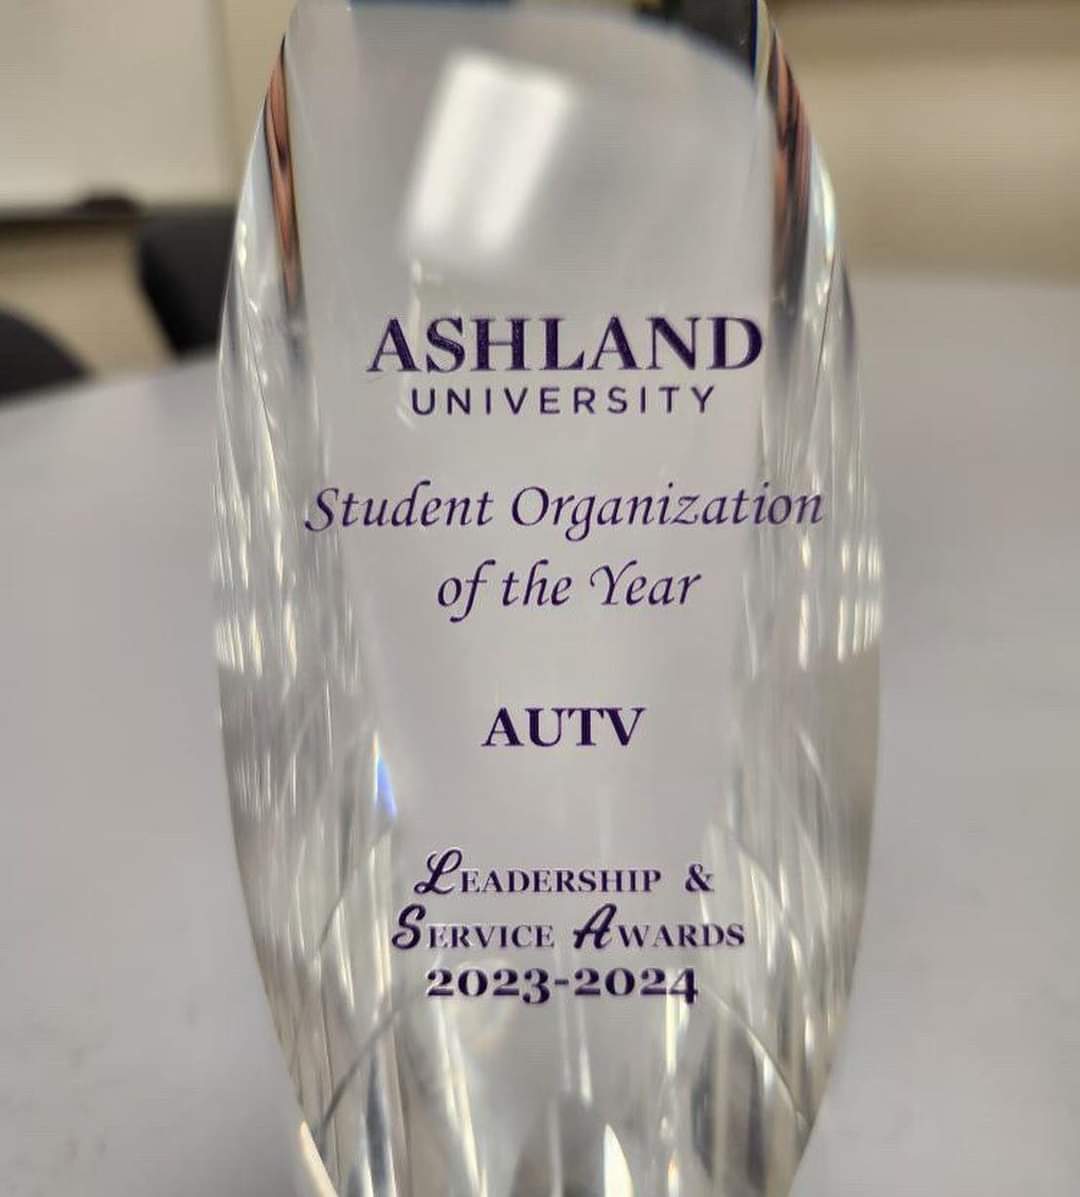 The+trophy+Ashland+University+gave+to+the+Student+Organization+of+the+Year.